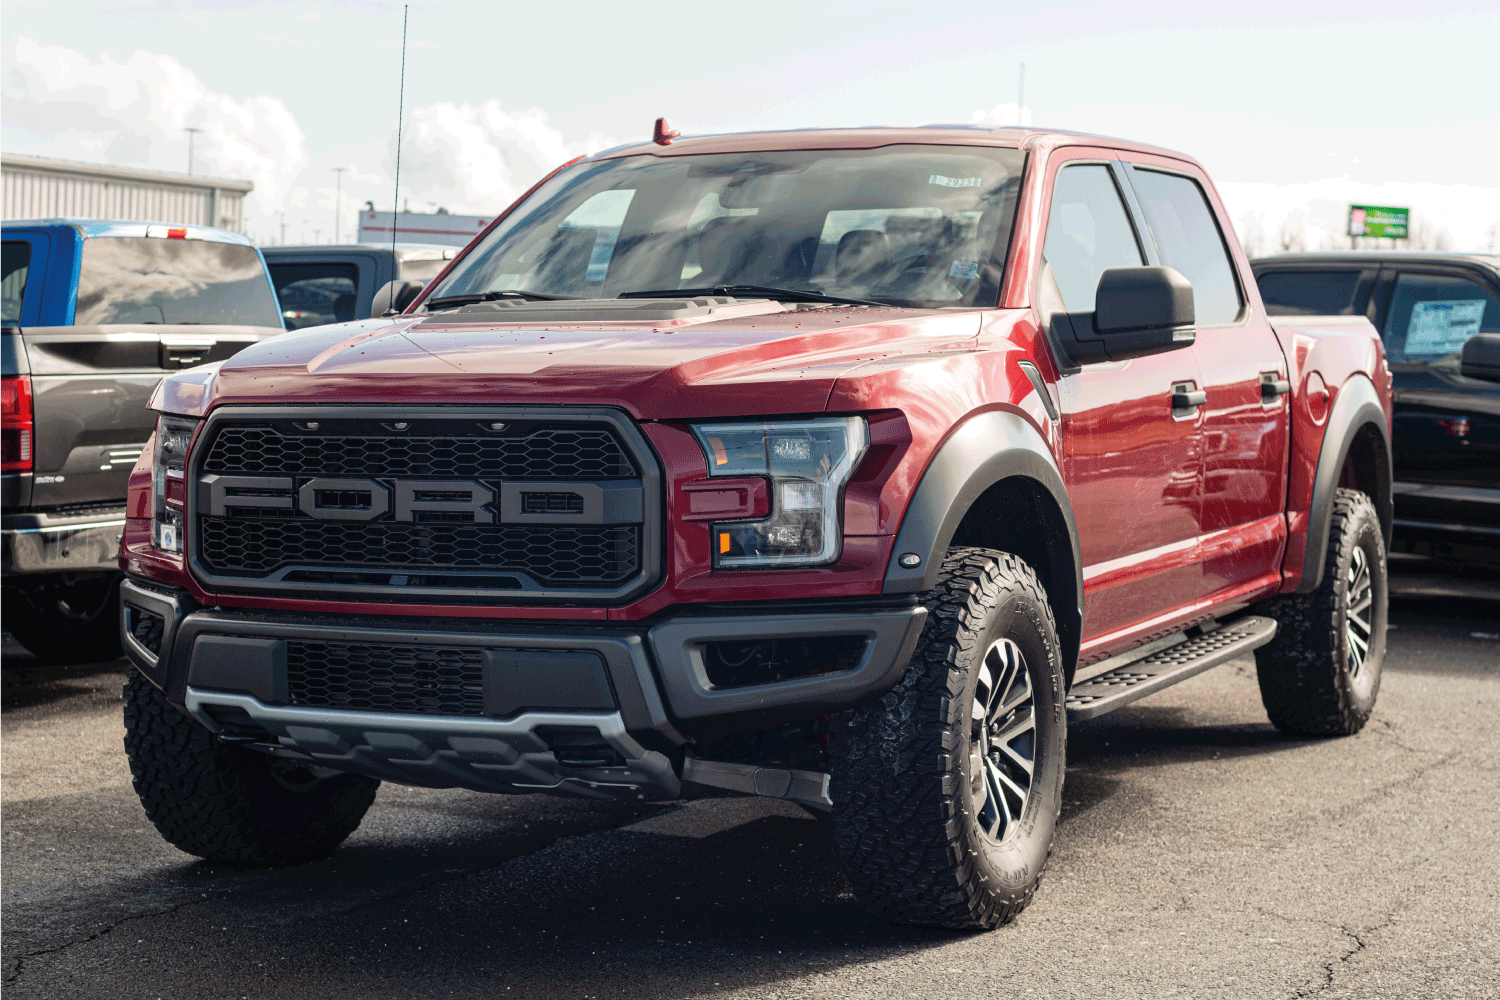 2020 Ford F-150 Raptor pickup truck at a Ford dealership.